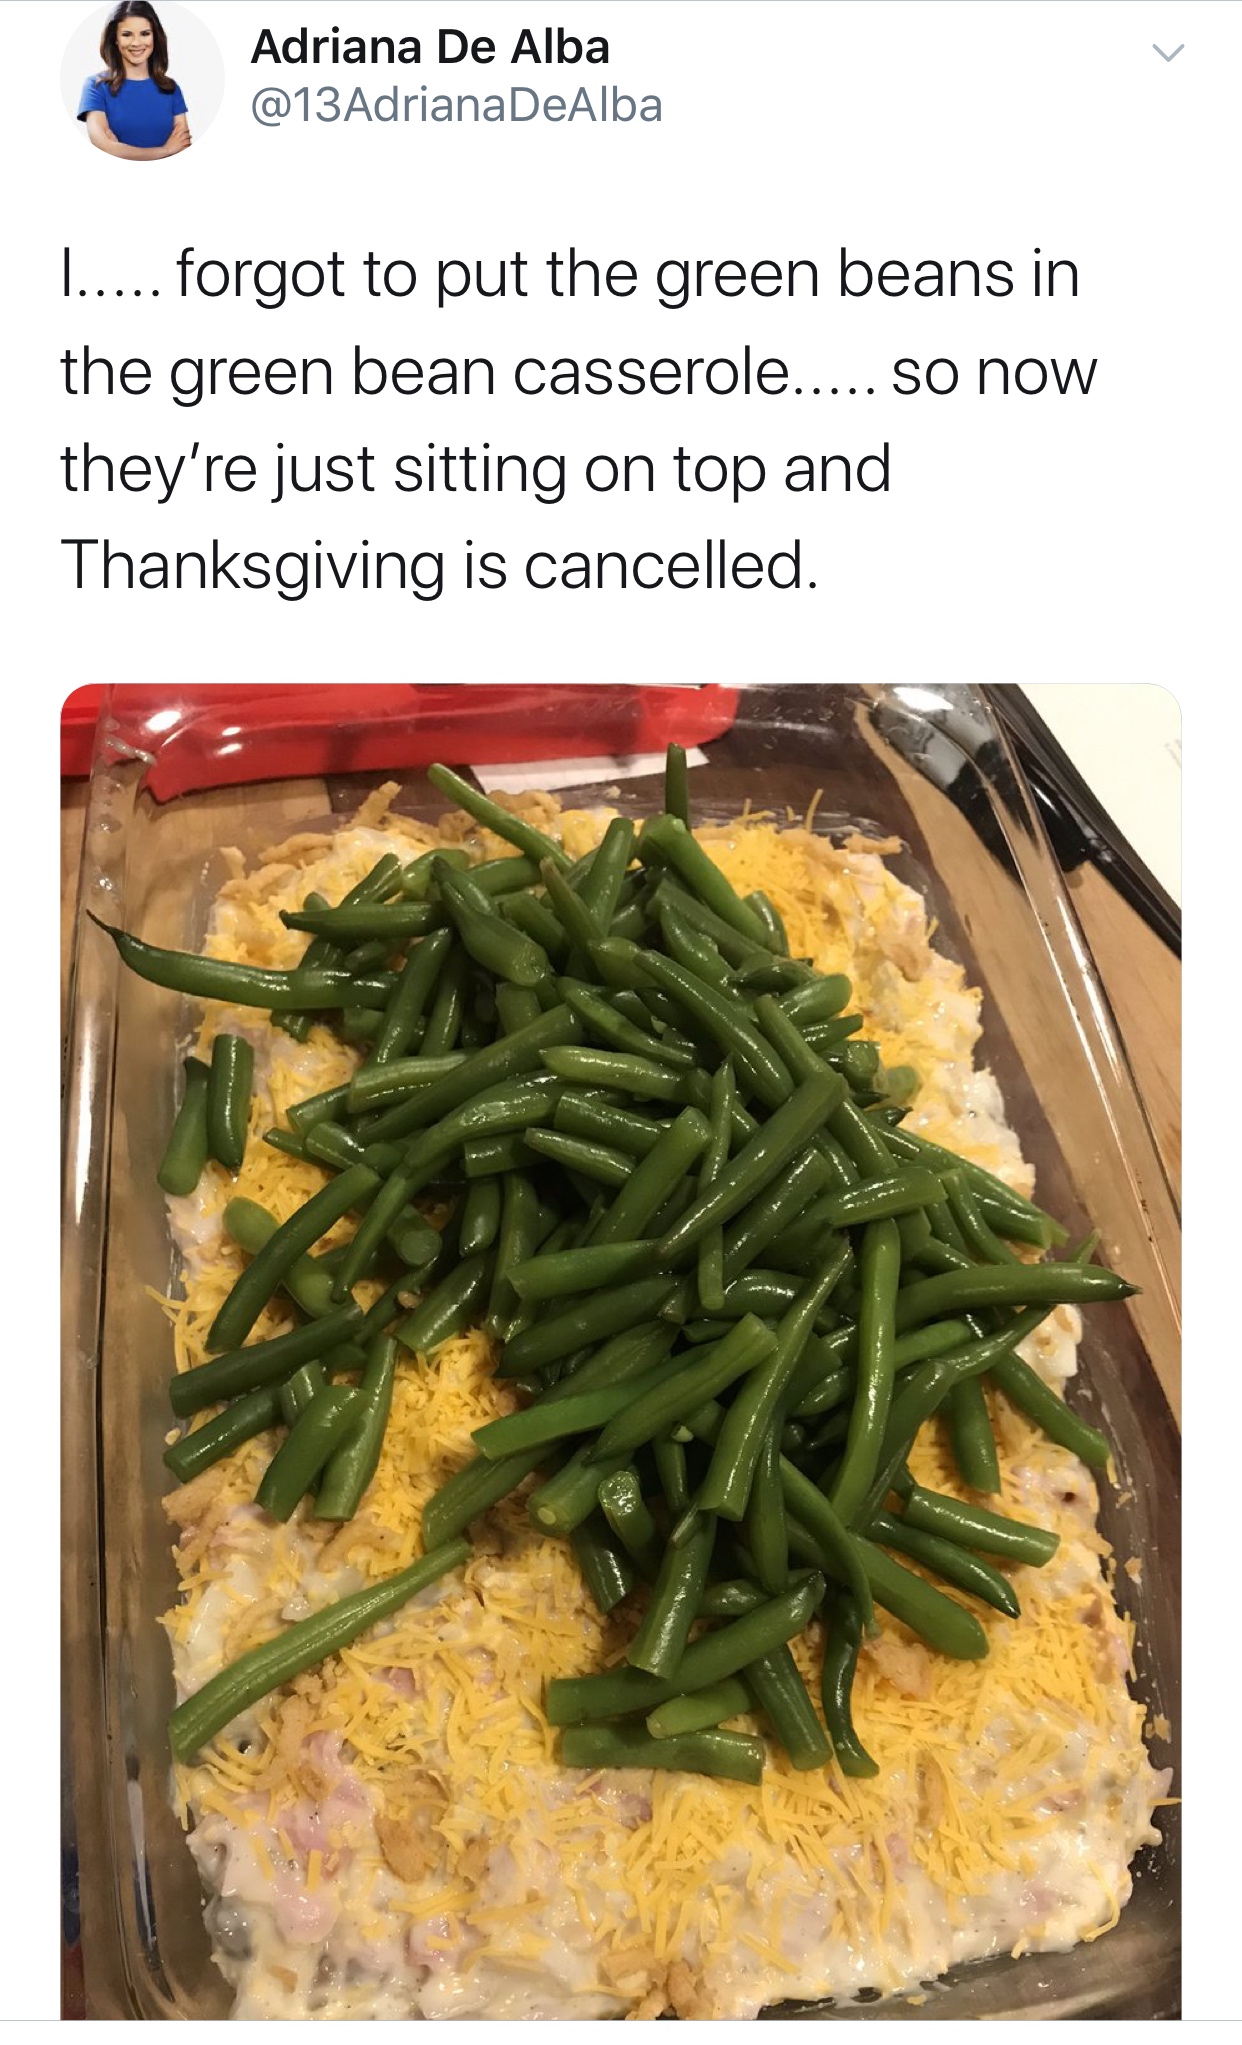 green bean - Adriana De Alba ..... forgot to put the green beans in the green bean casserole..... so now they're just sitting on top and Thanksgiving is cancelled.